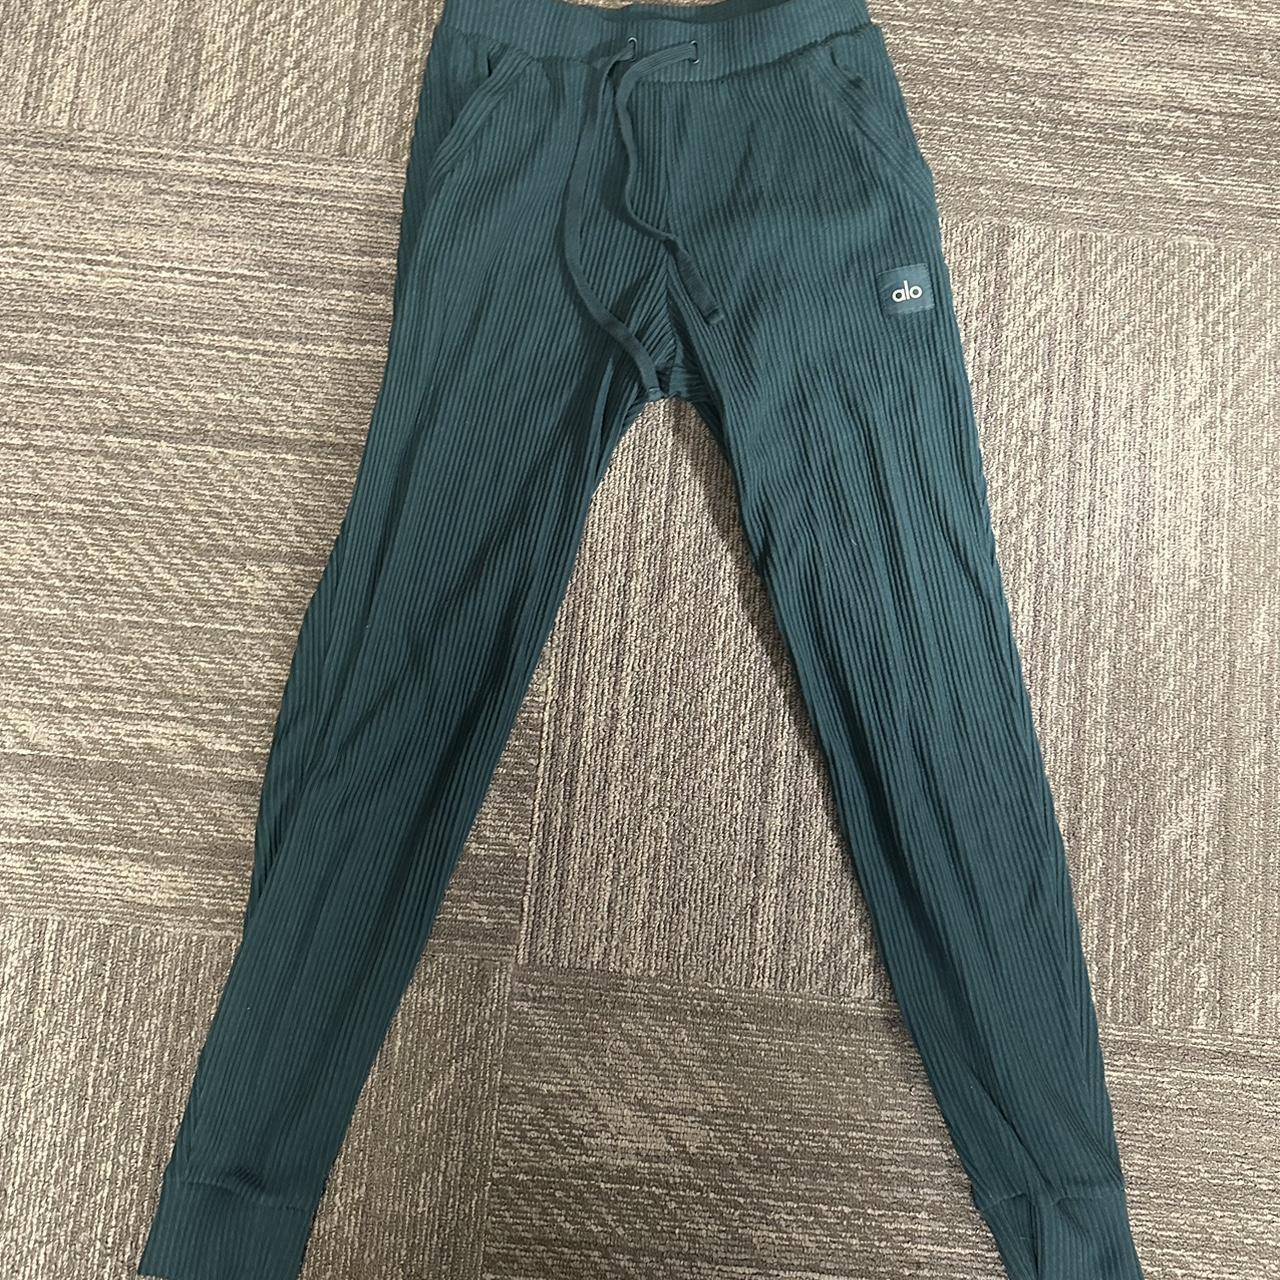 Alo yoga muse sweatpants size M in green. Only worn... - Depop